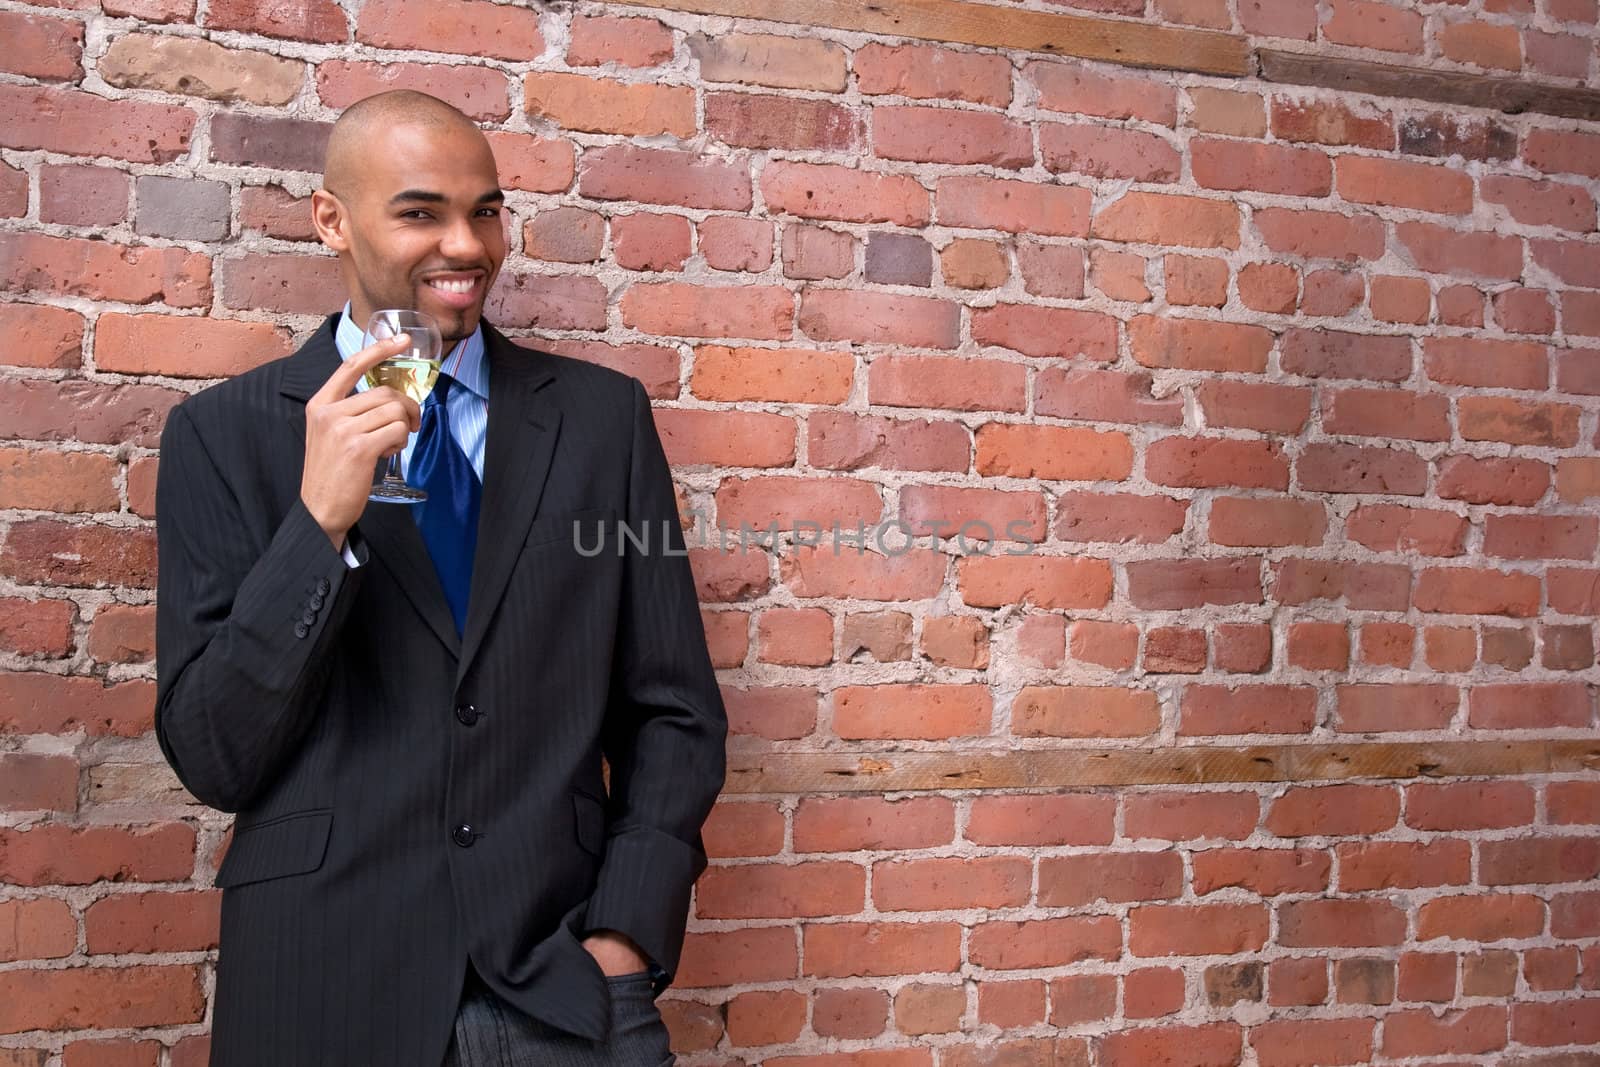 Young business man leaning against the brick wall, drinking wine and smiling.